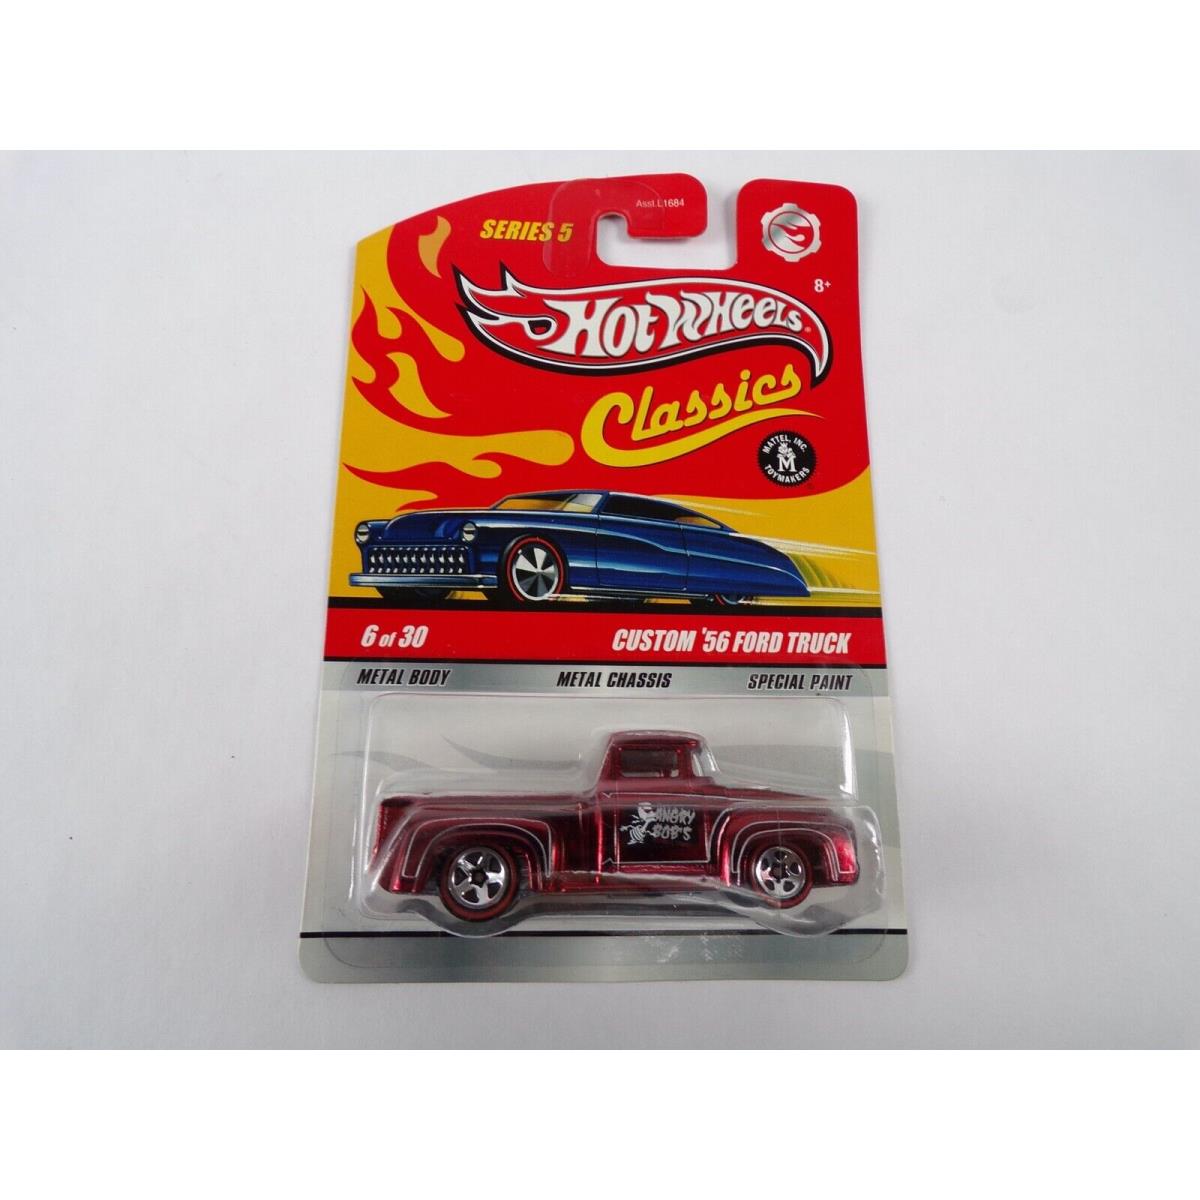 Hot Wheels Classics Series 5 Chase 6 Custom `56 Ford Truck Red